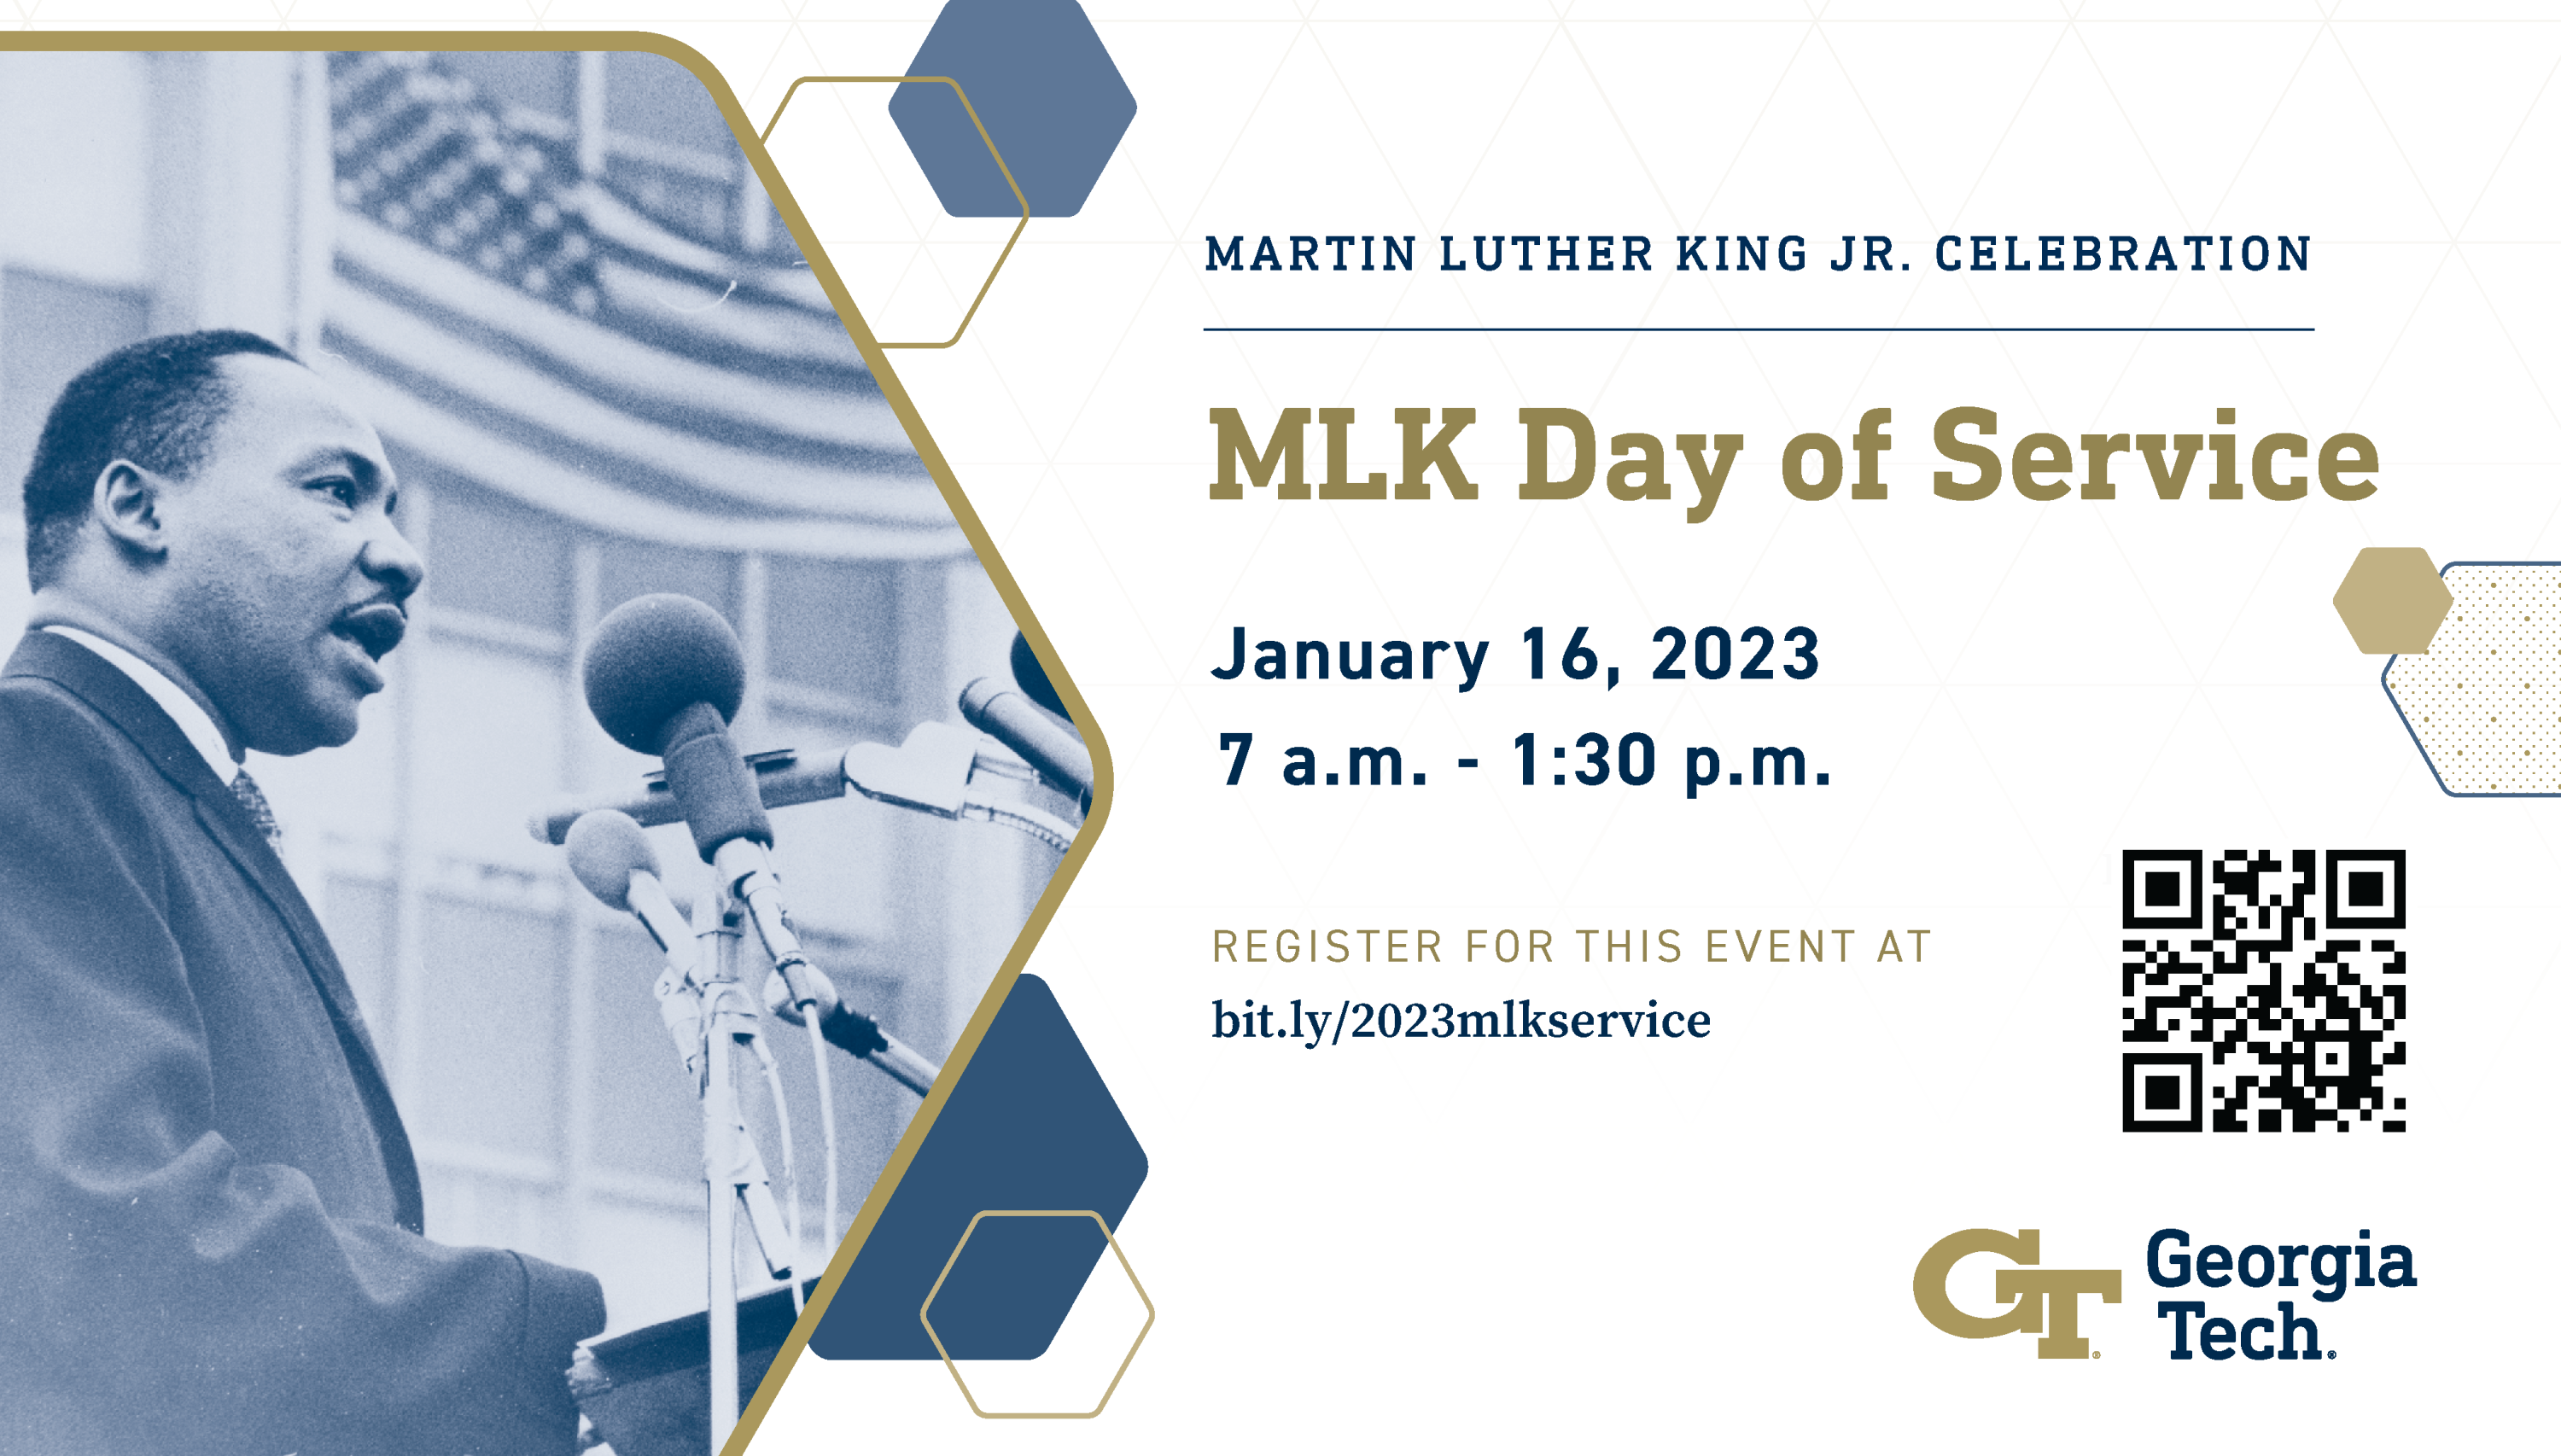 During Georgia Tech’s annual MLK Day of Service, which honors the life and legacy of Martin Luther King Jr., participants will serve in teams and participate in service projects with metro Atlanta community partners.